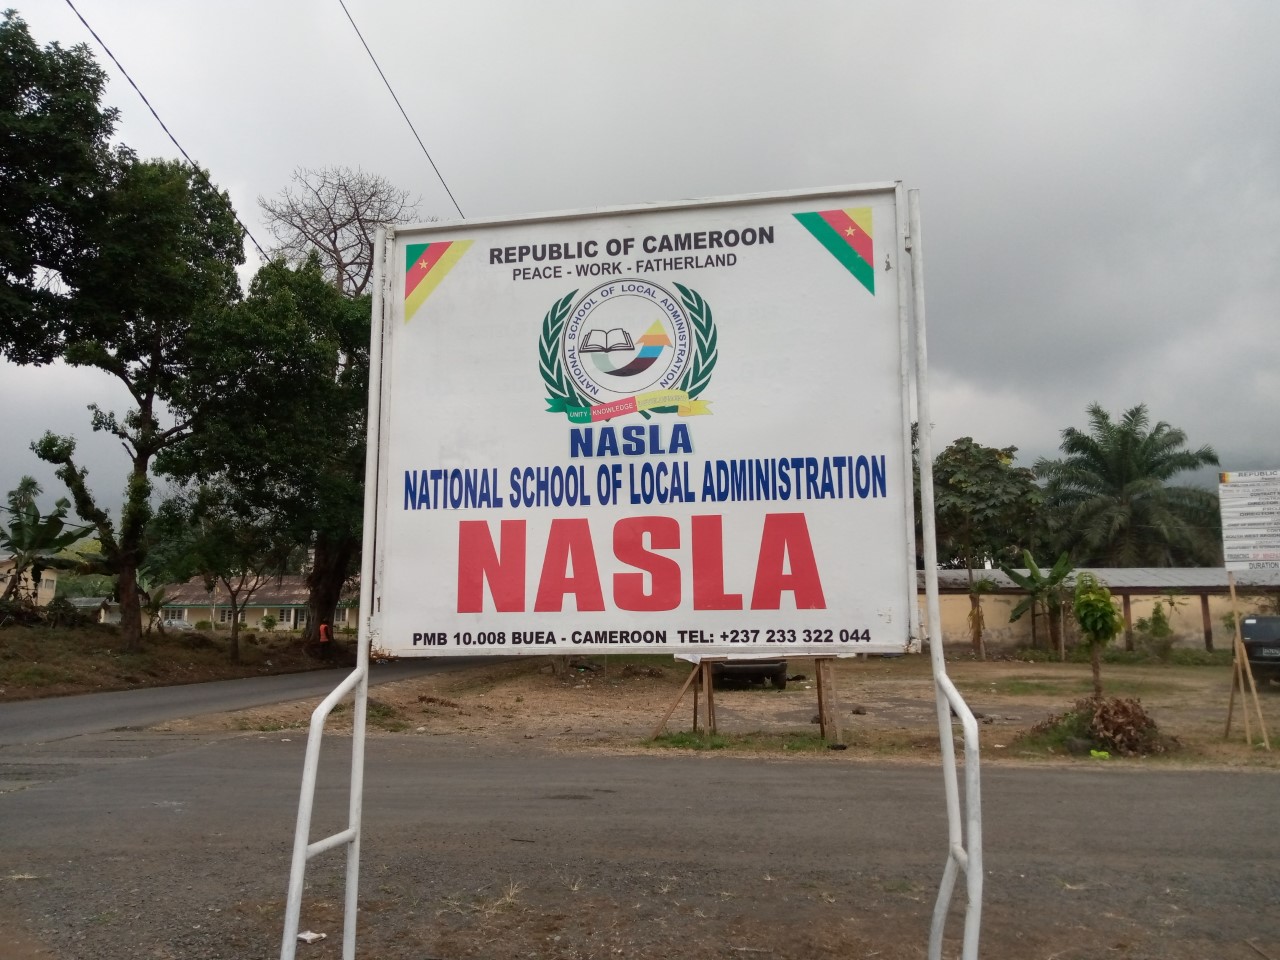 A sign post indicating the campus of the National School of Local Administration, NASLA in Buea